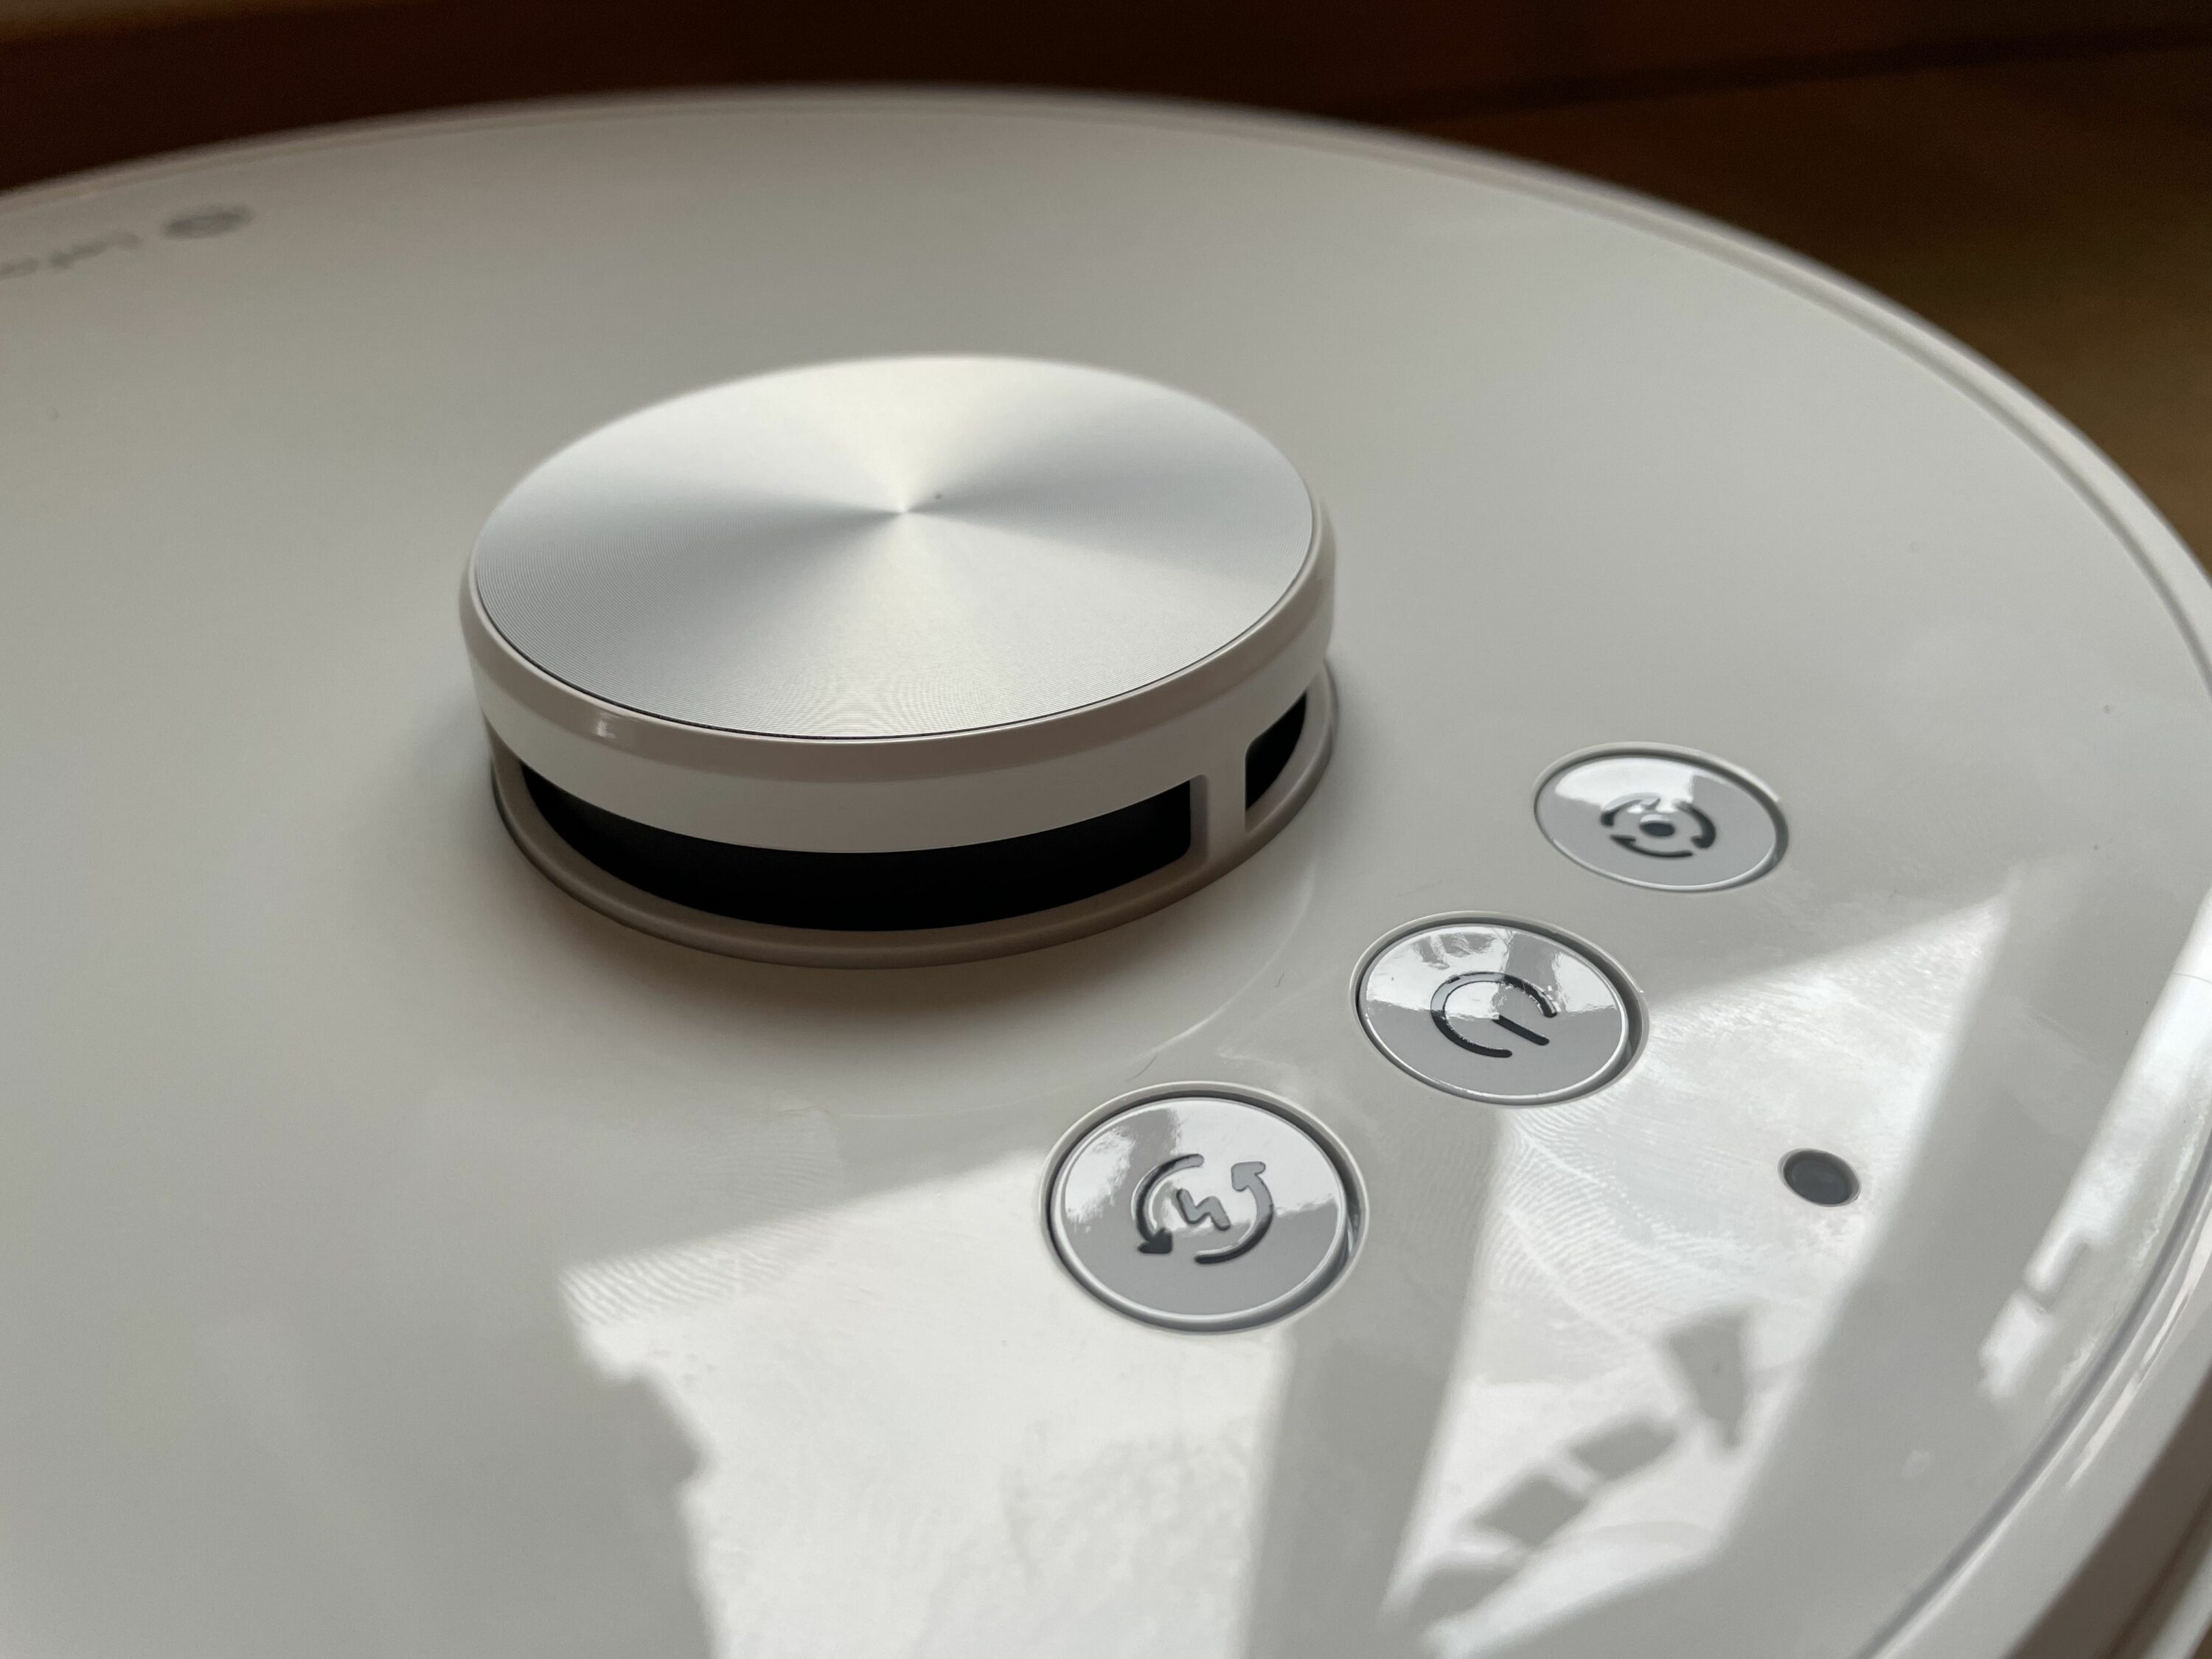 Is THIS Smart Robot Vacuum Better Than the Rest? Lefant M1 Review 